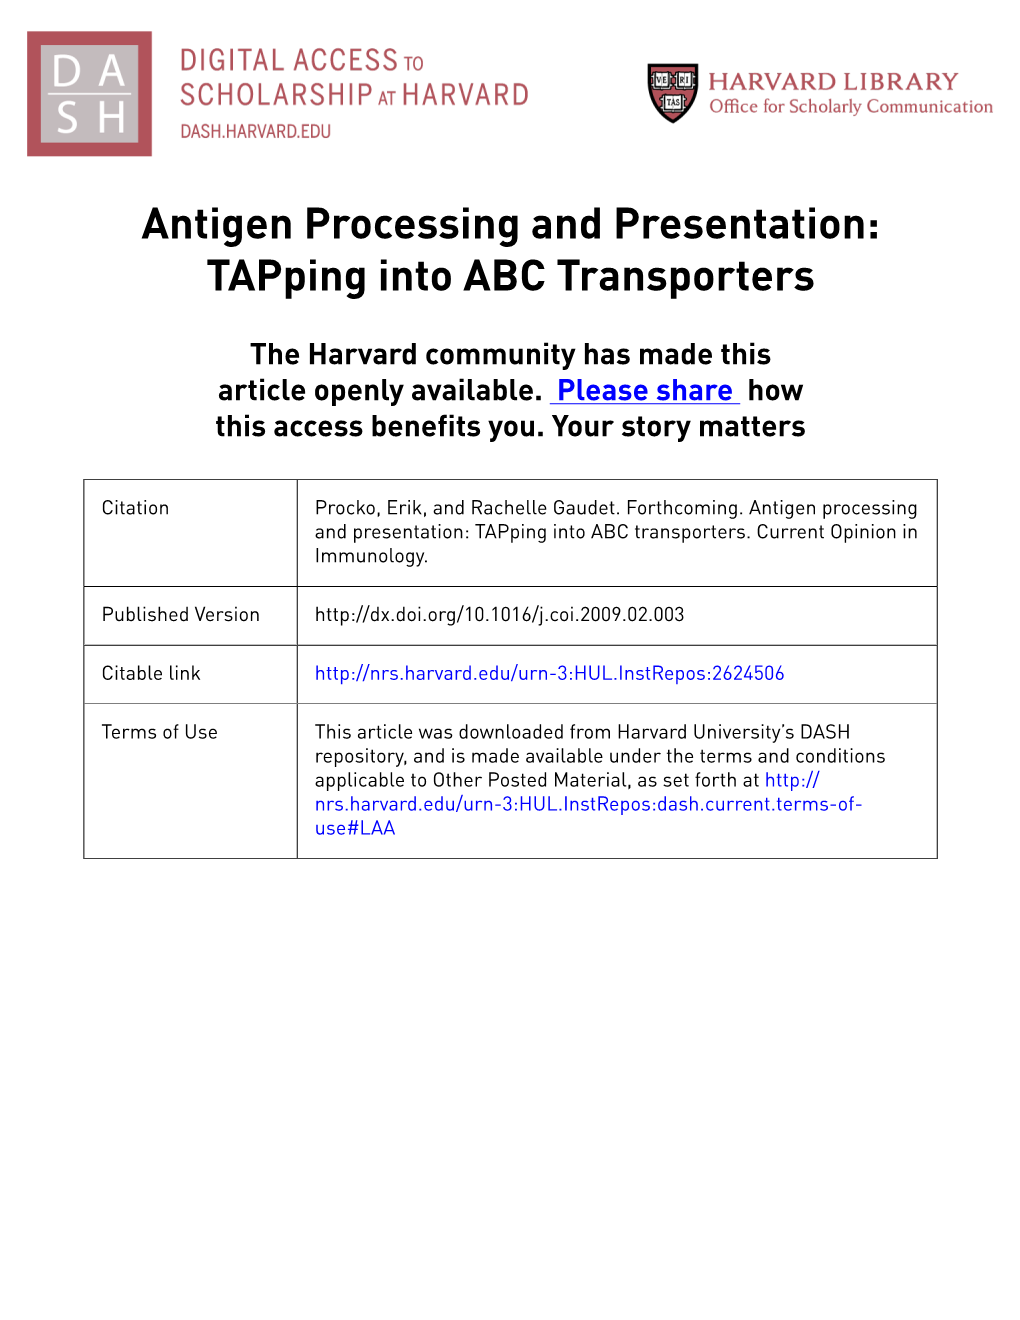 Antigen Processing and Presentation: Tapping Into ABC Transporters